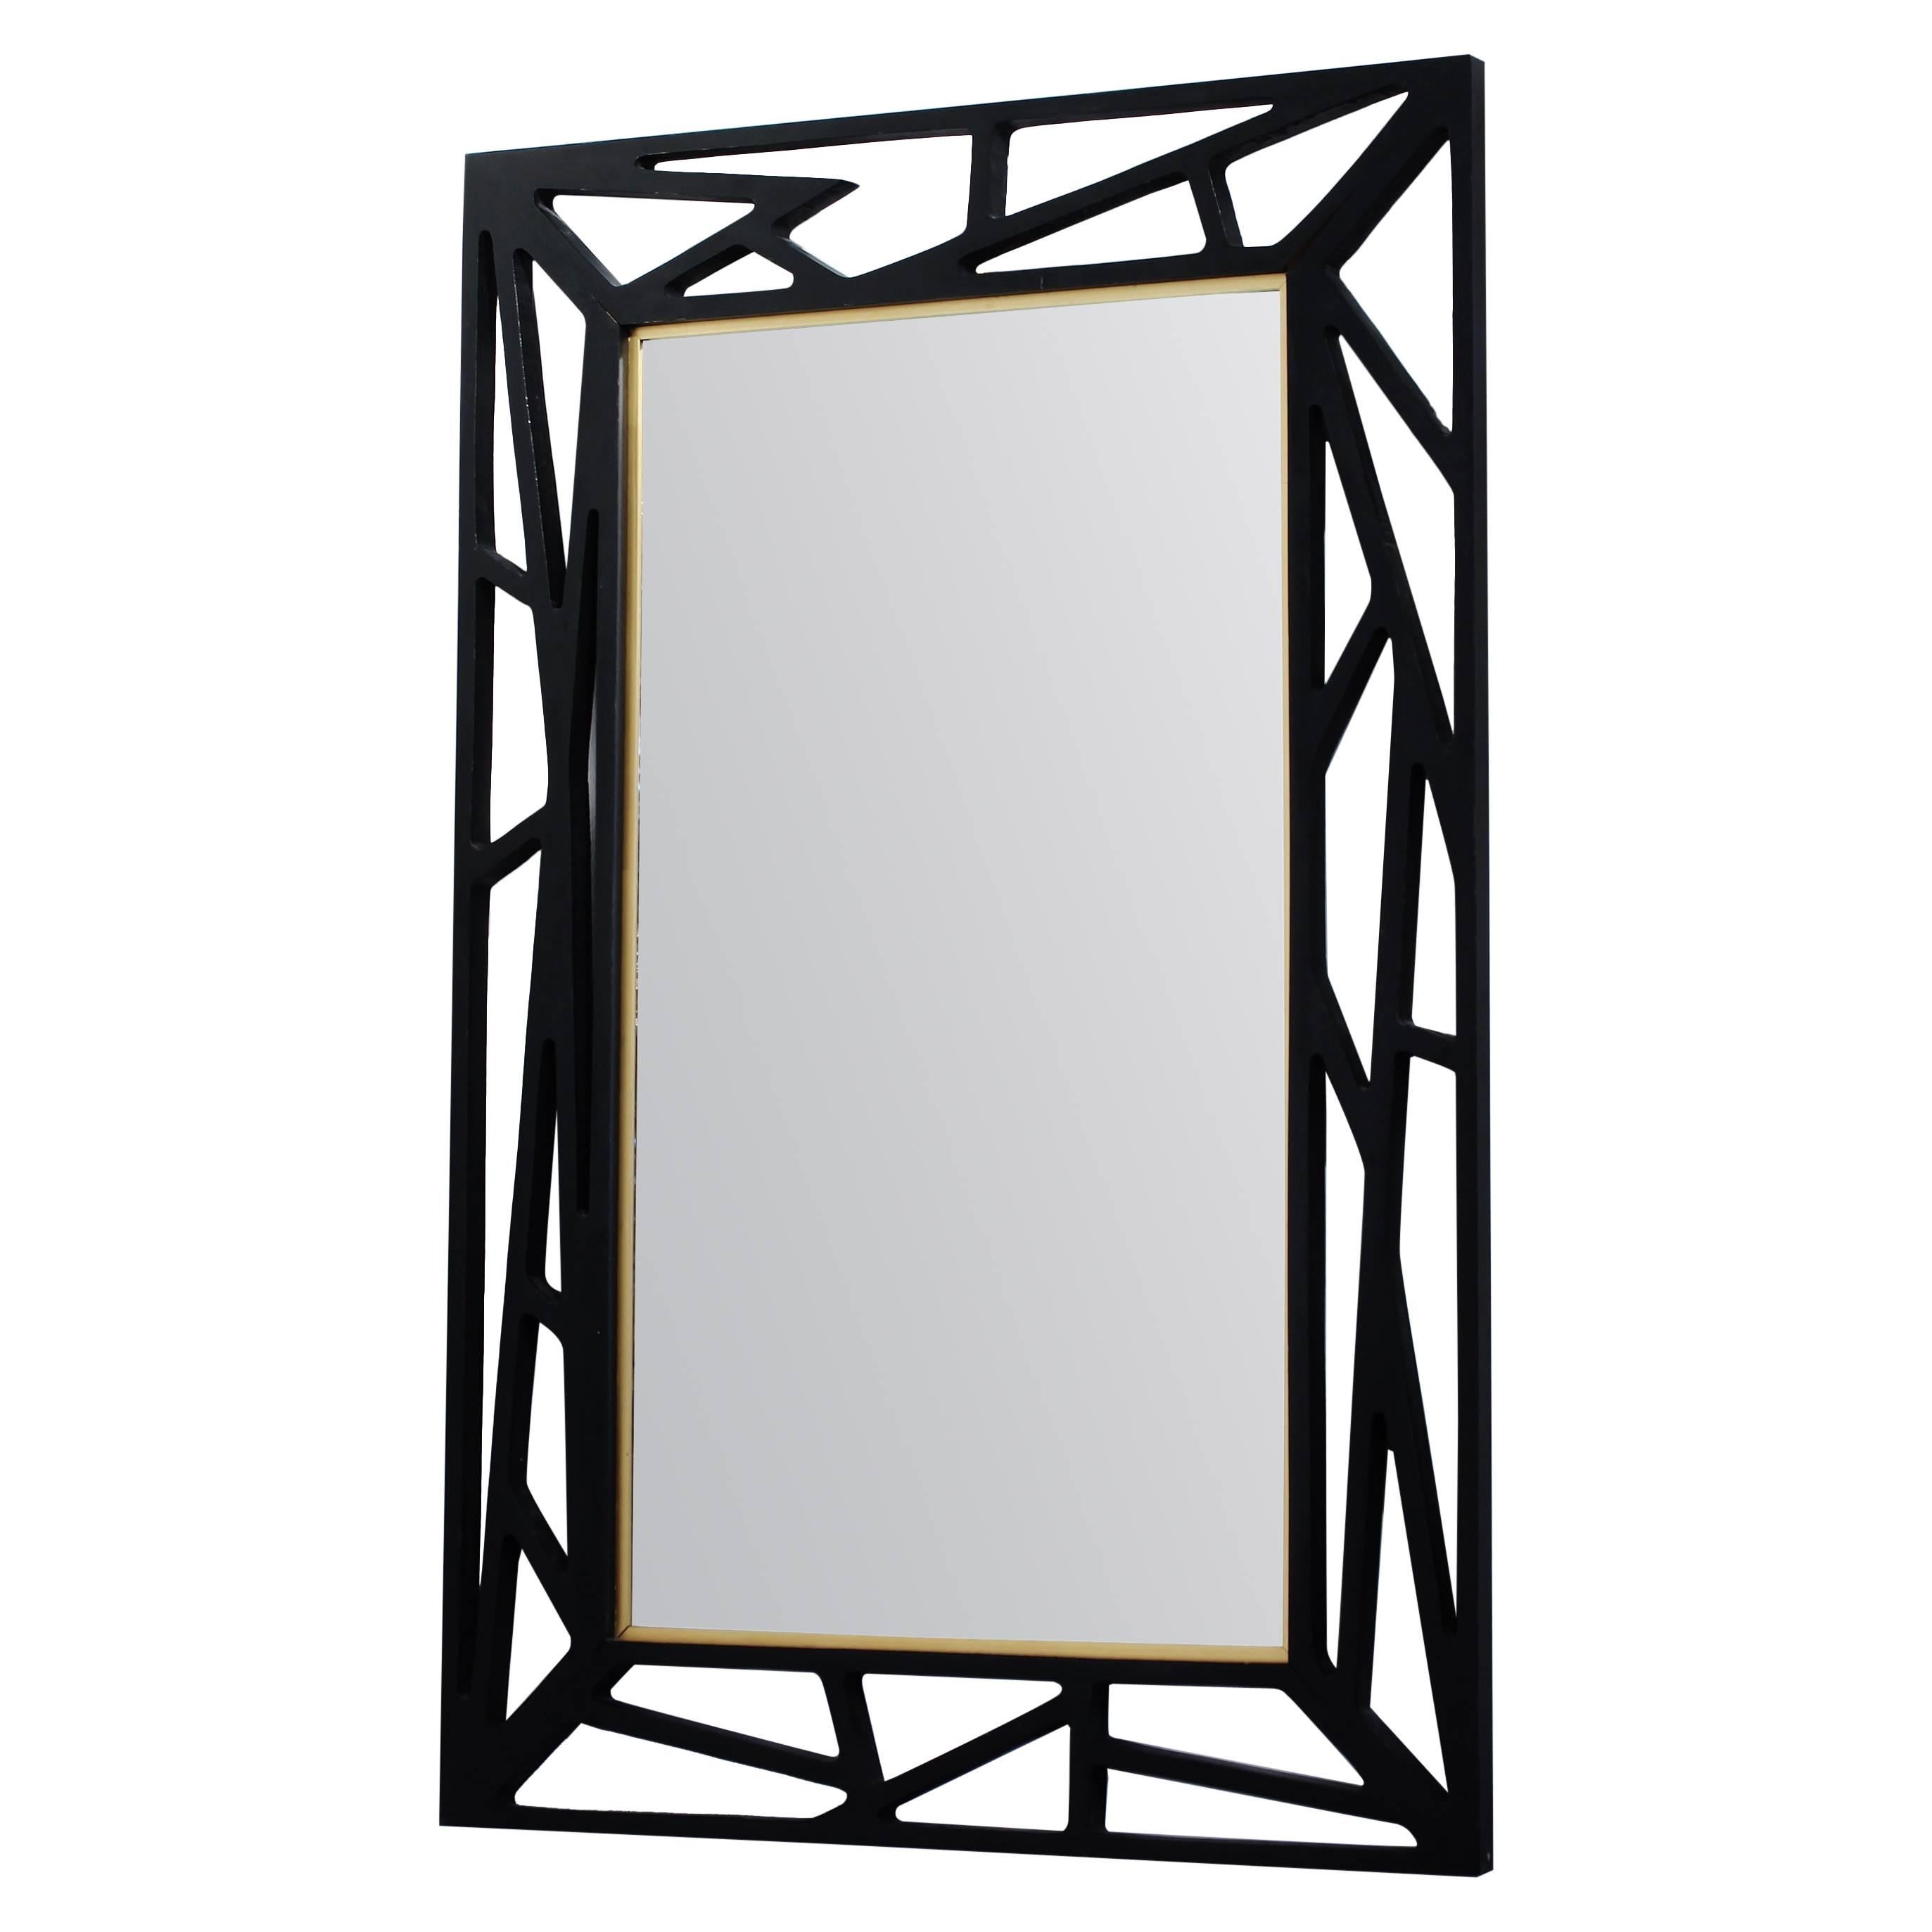 1940s Black Lacquer Mirror from Eden Spegel